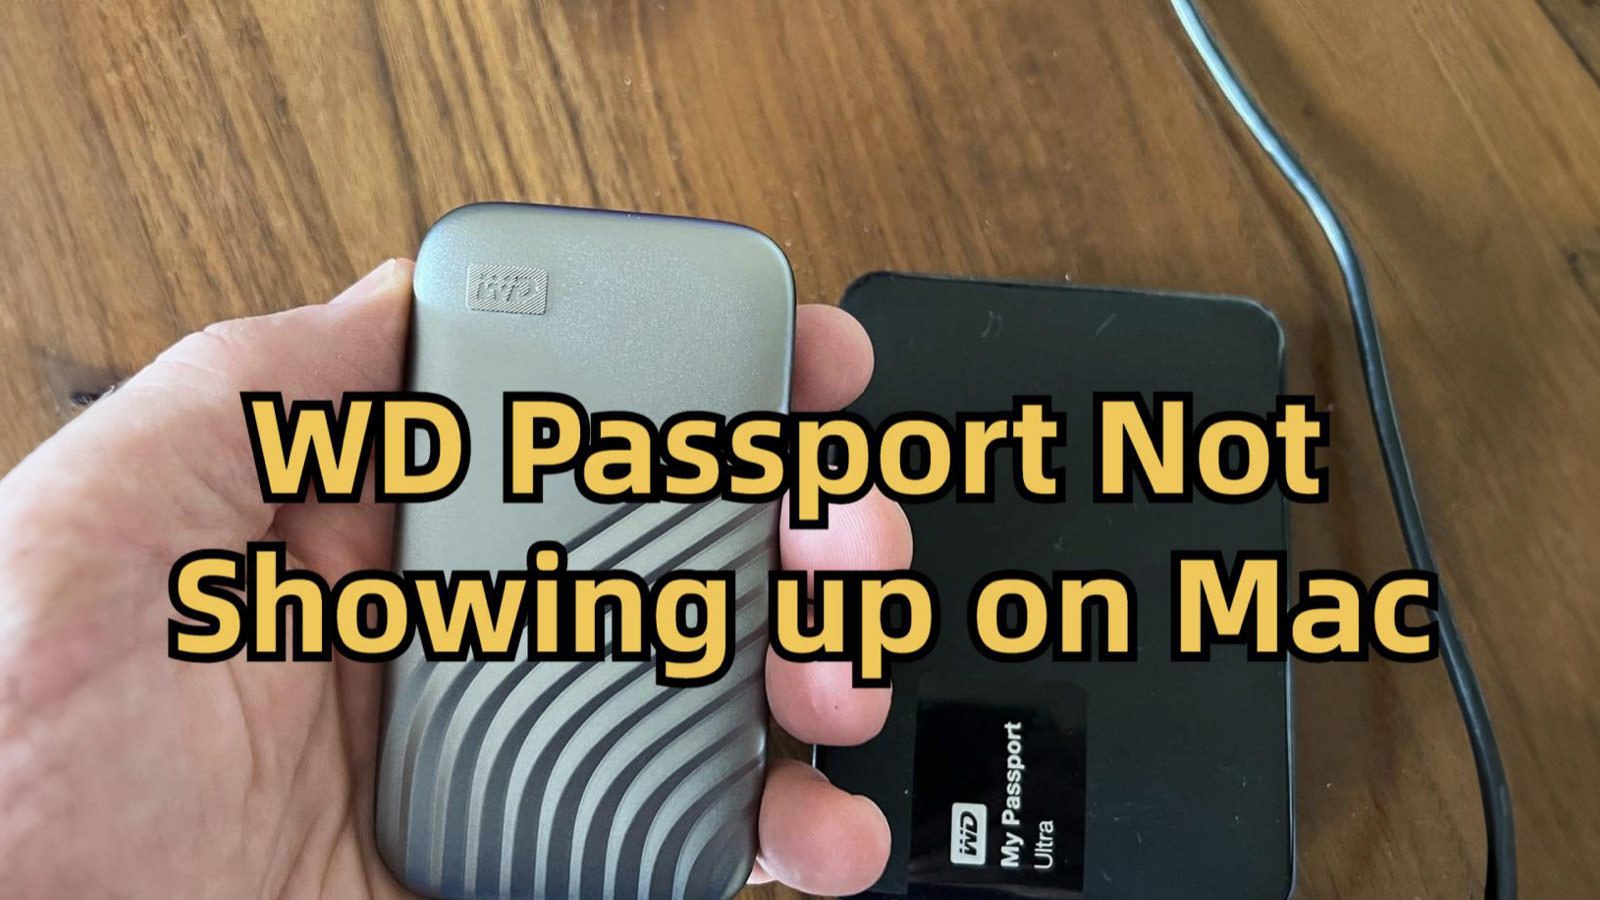 WD My Passport external hard drive connected to a Mac